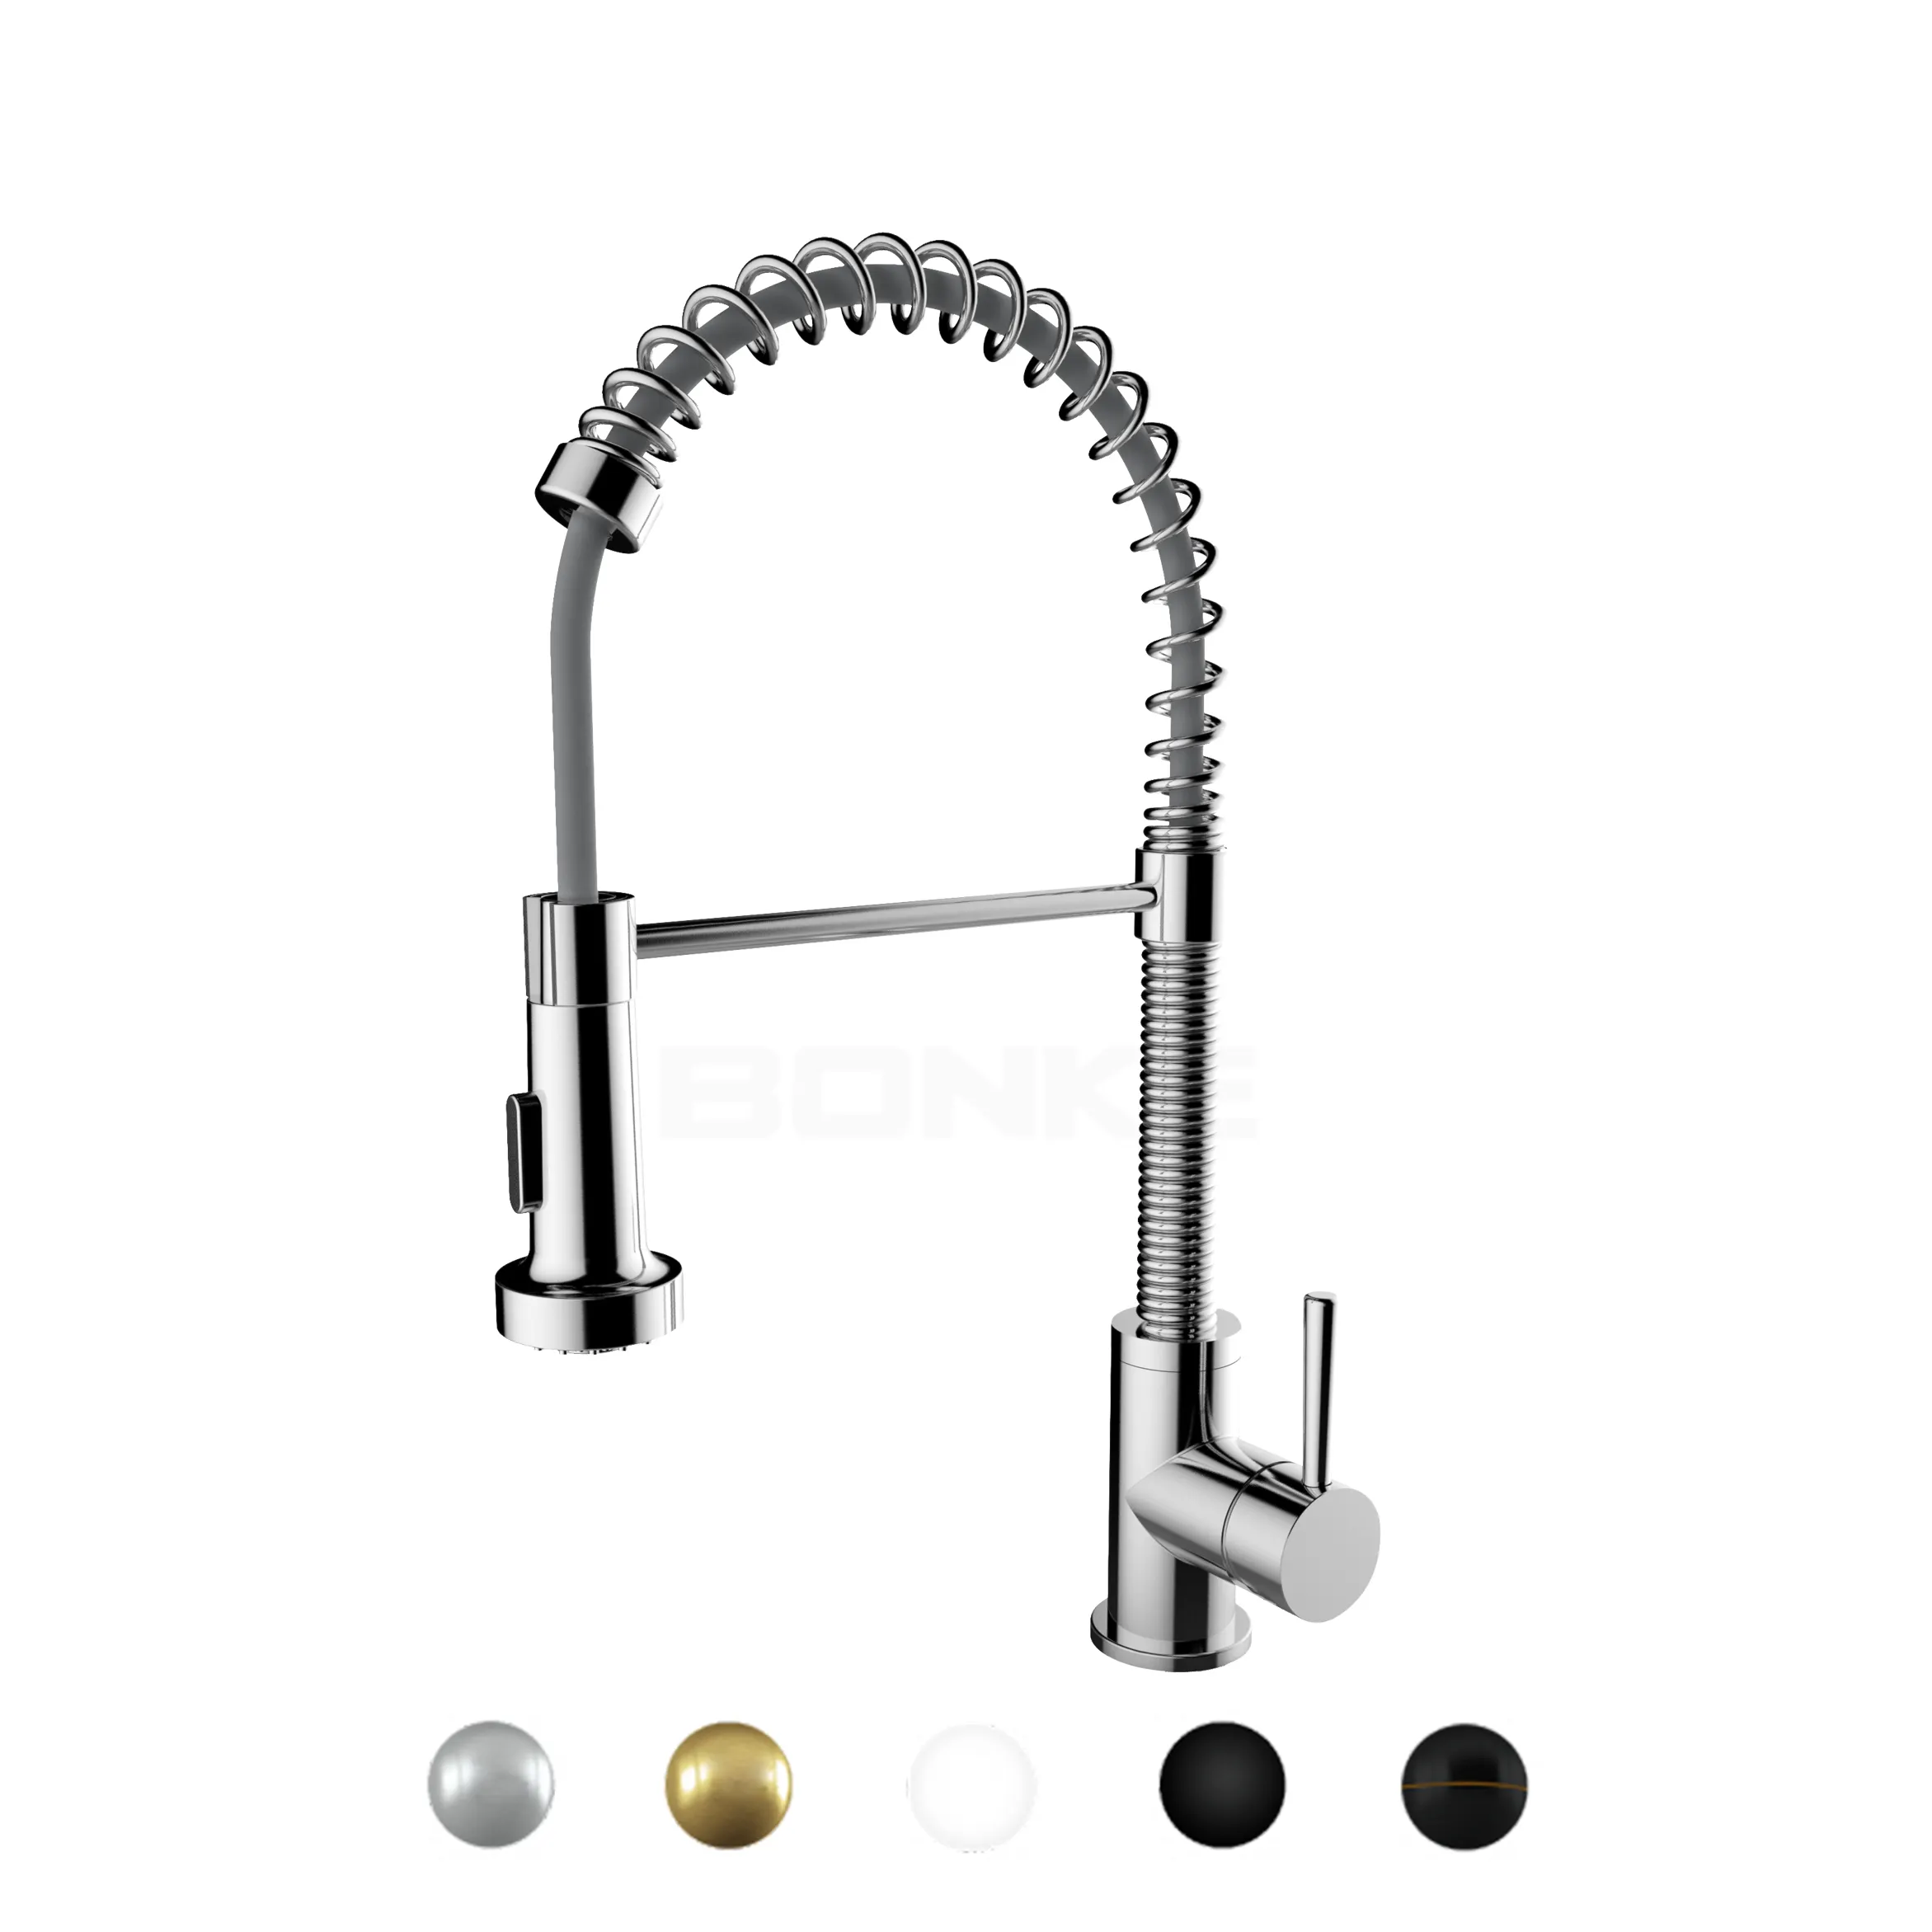 Lead Free Stainless Steel Single Lever Handle Pull Down Sprayer Brushed Nickel Kitchen Faucet Kitchen Sink Faucet